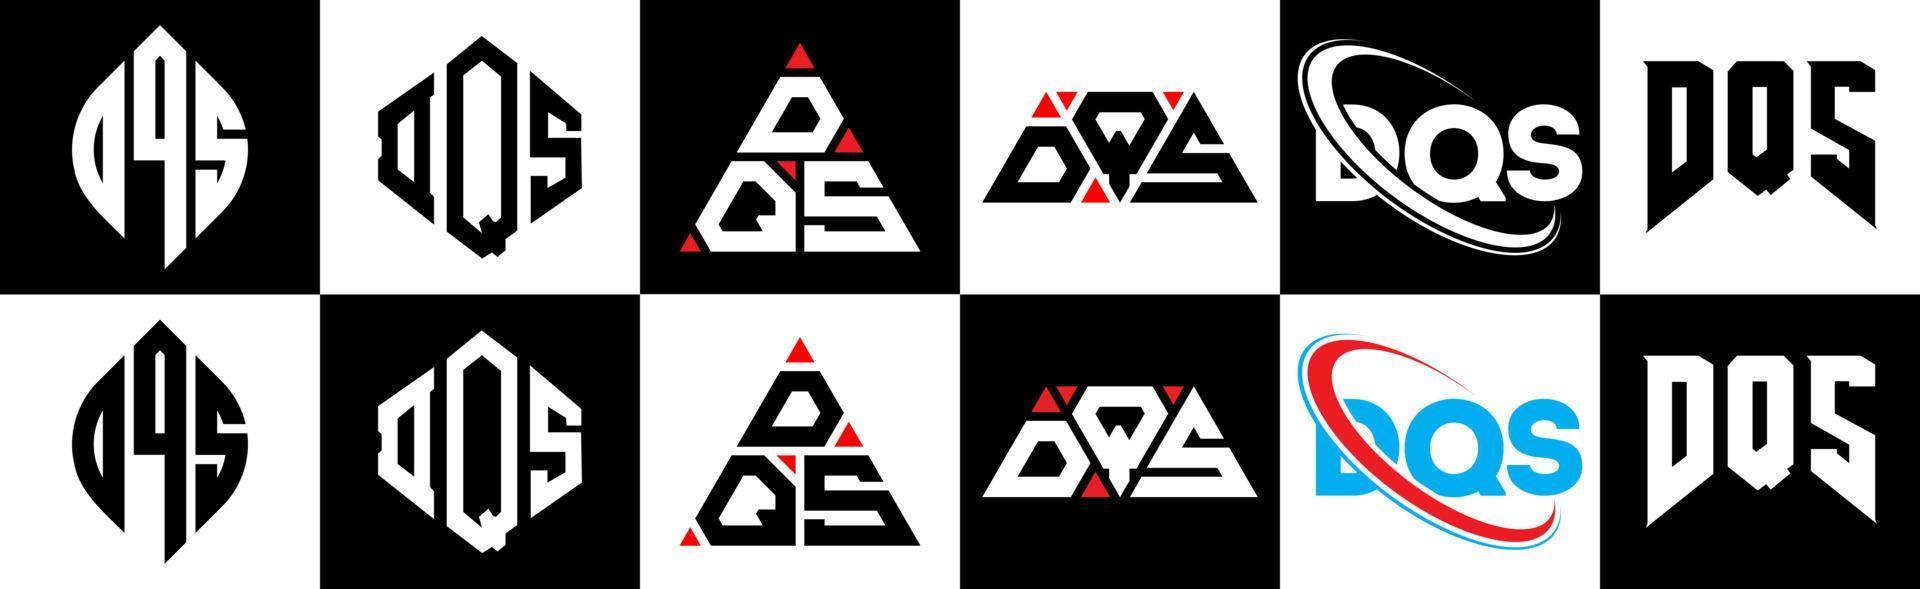 DQS letter logo design in six style. DQS polygon, circle, triangle, hexagon, flat and simple style with black and white color variation letter logo set in one artboard. DQS minimalist and classic logo vector